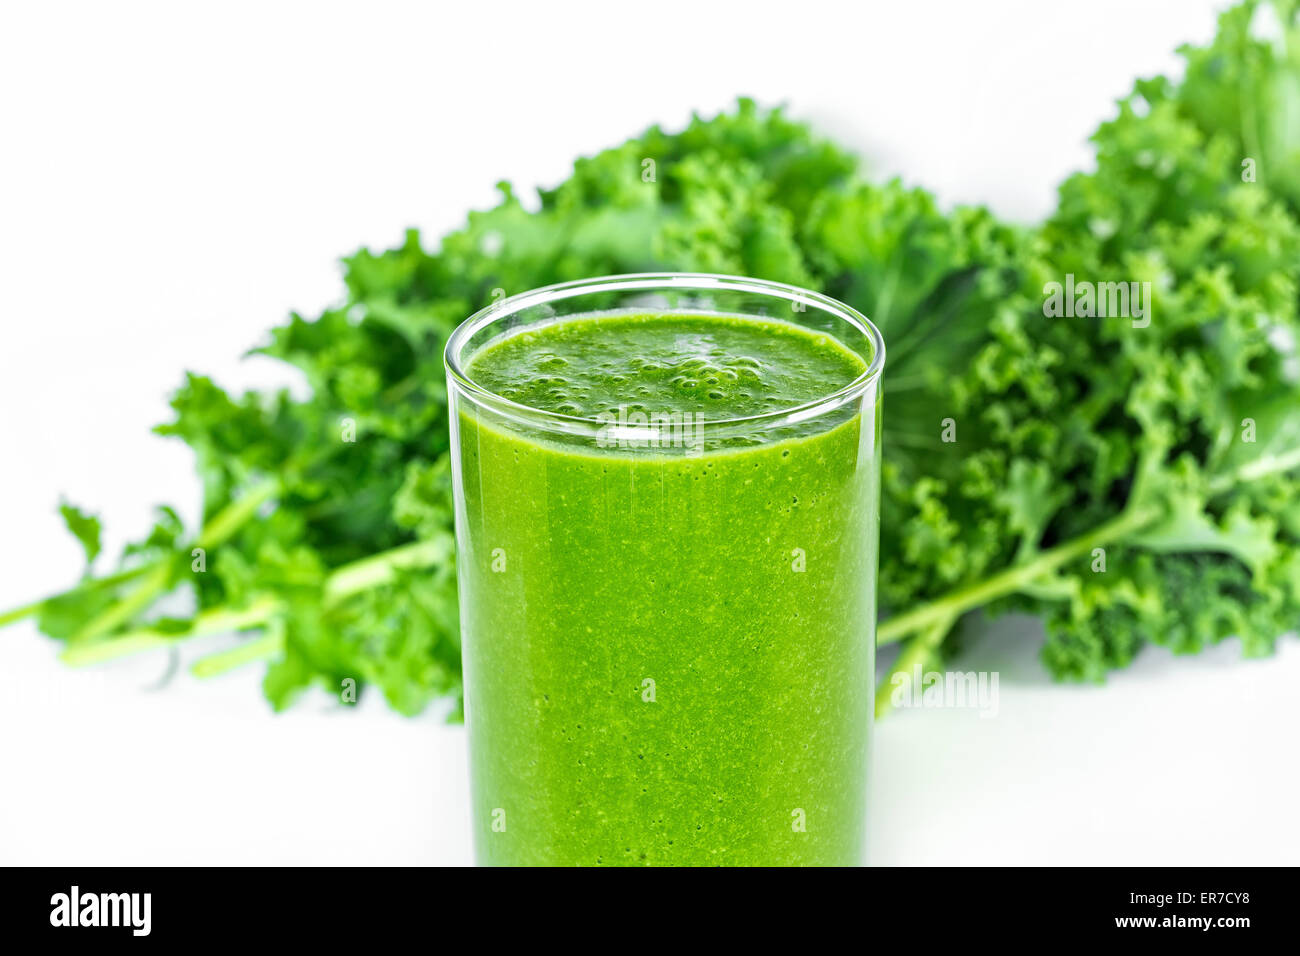 Green smoothie with kale in background. Stock Photo